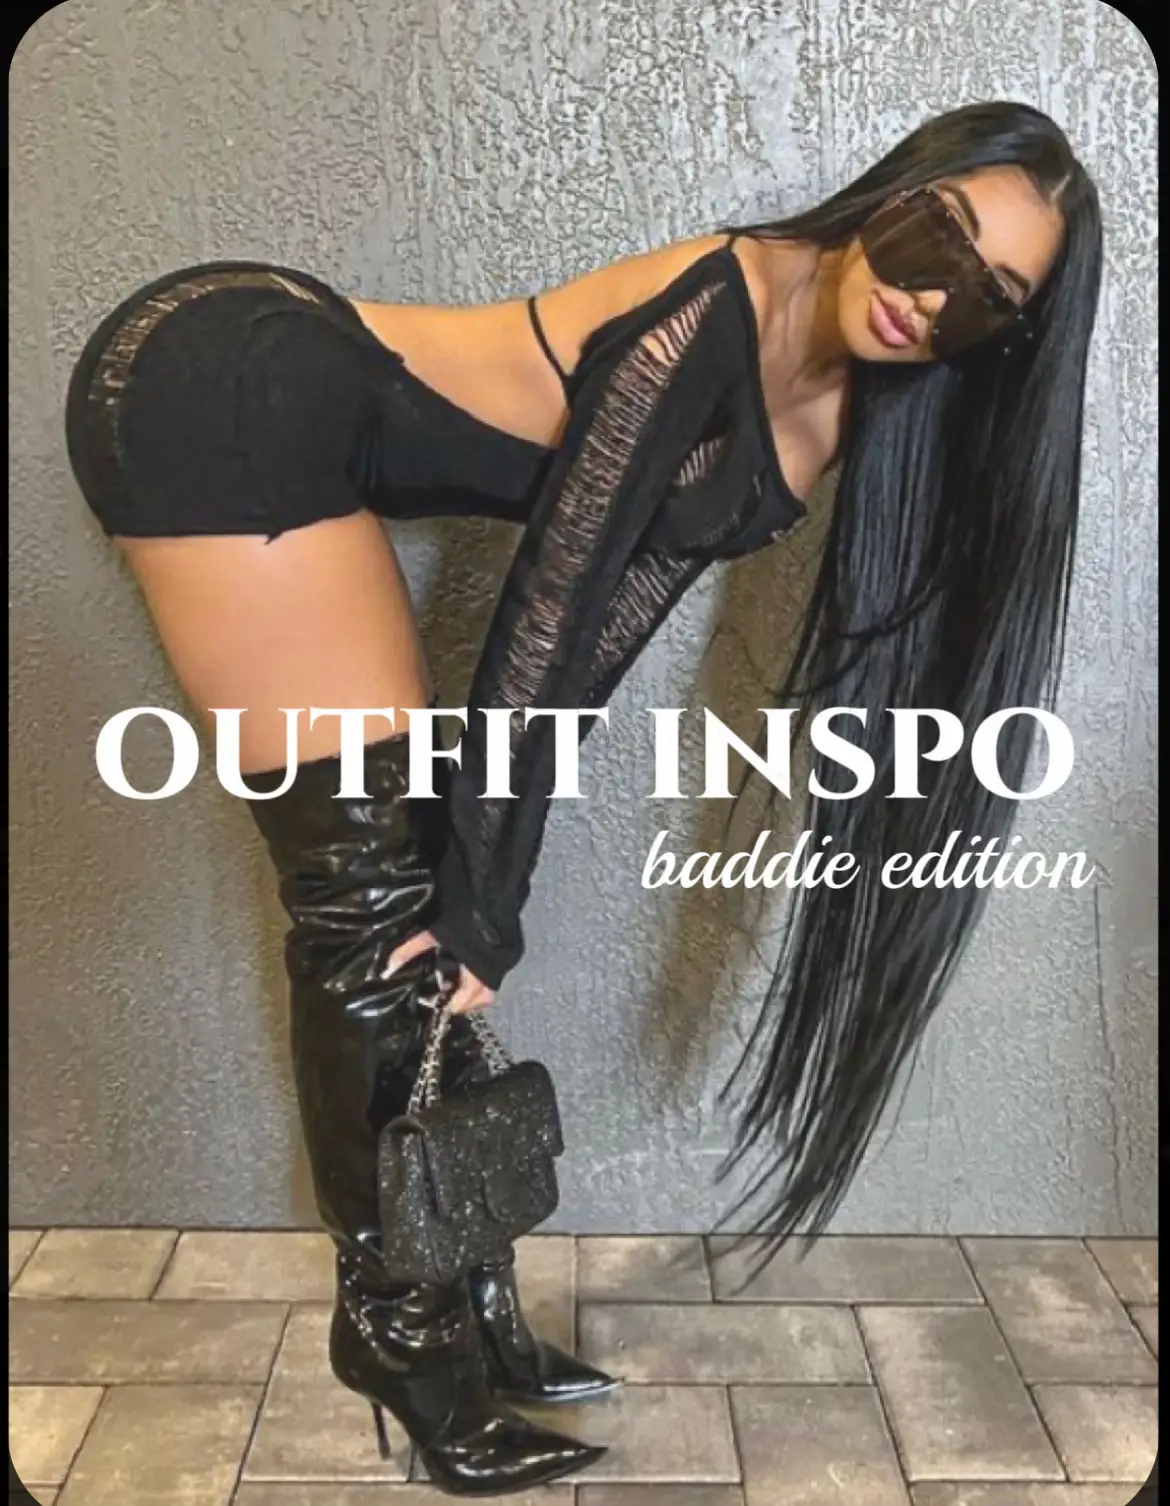 Corset outfit 🖤 Send this to a friend who would wear this. ✨ . . . #b